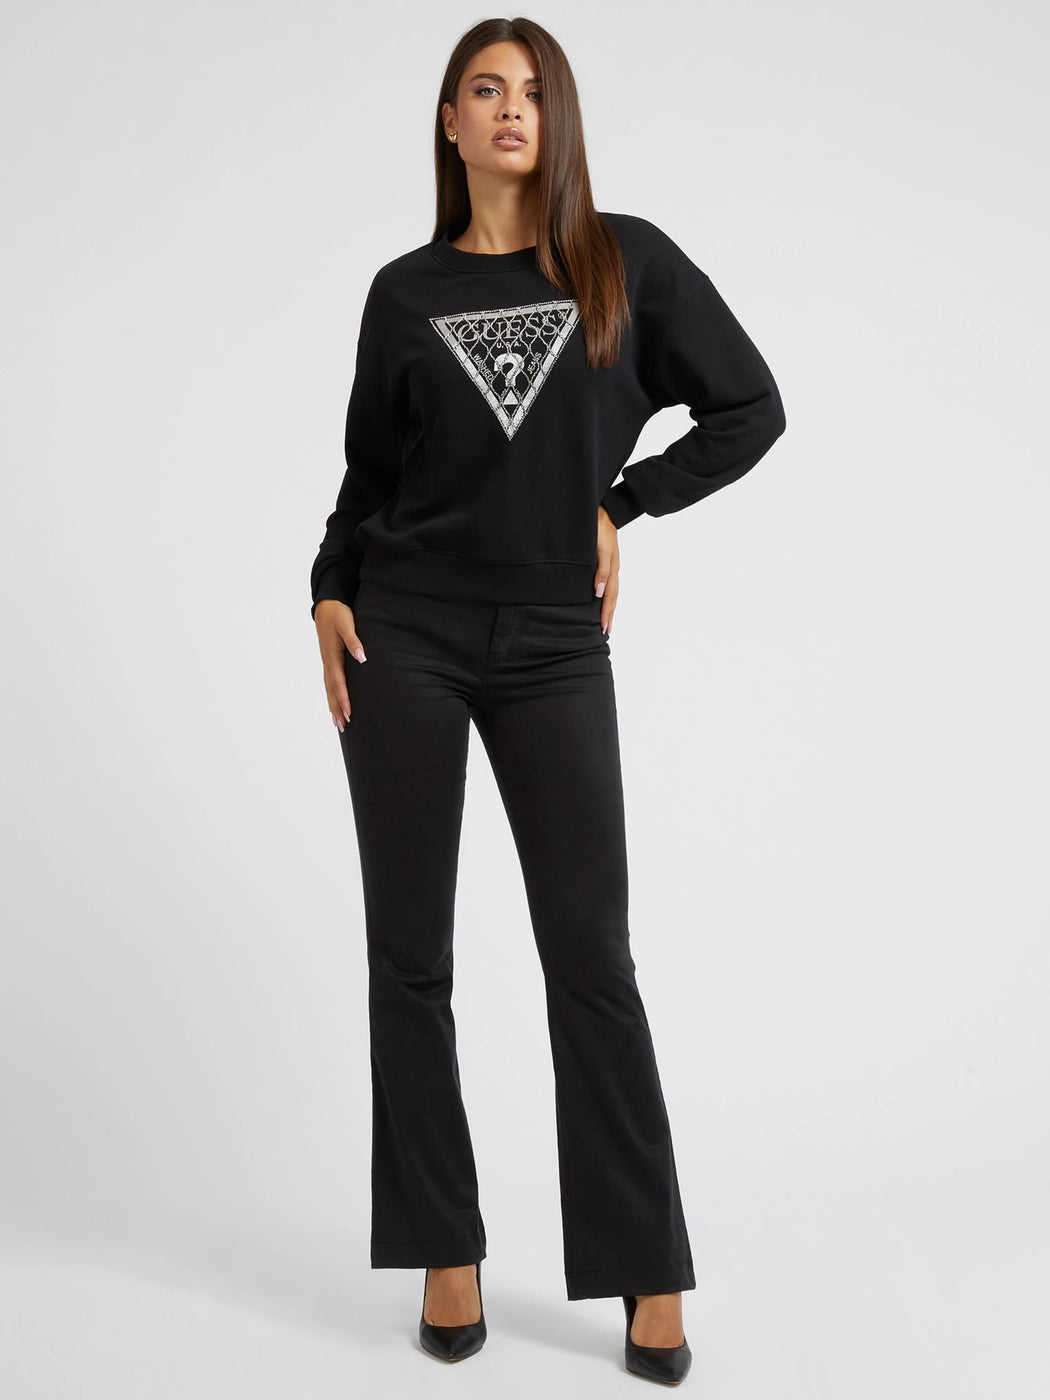 guess black crystal logo sweater